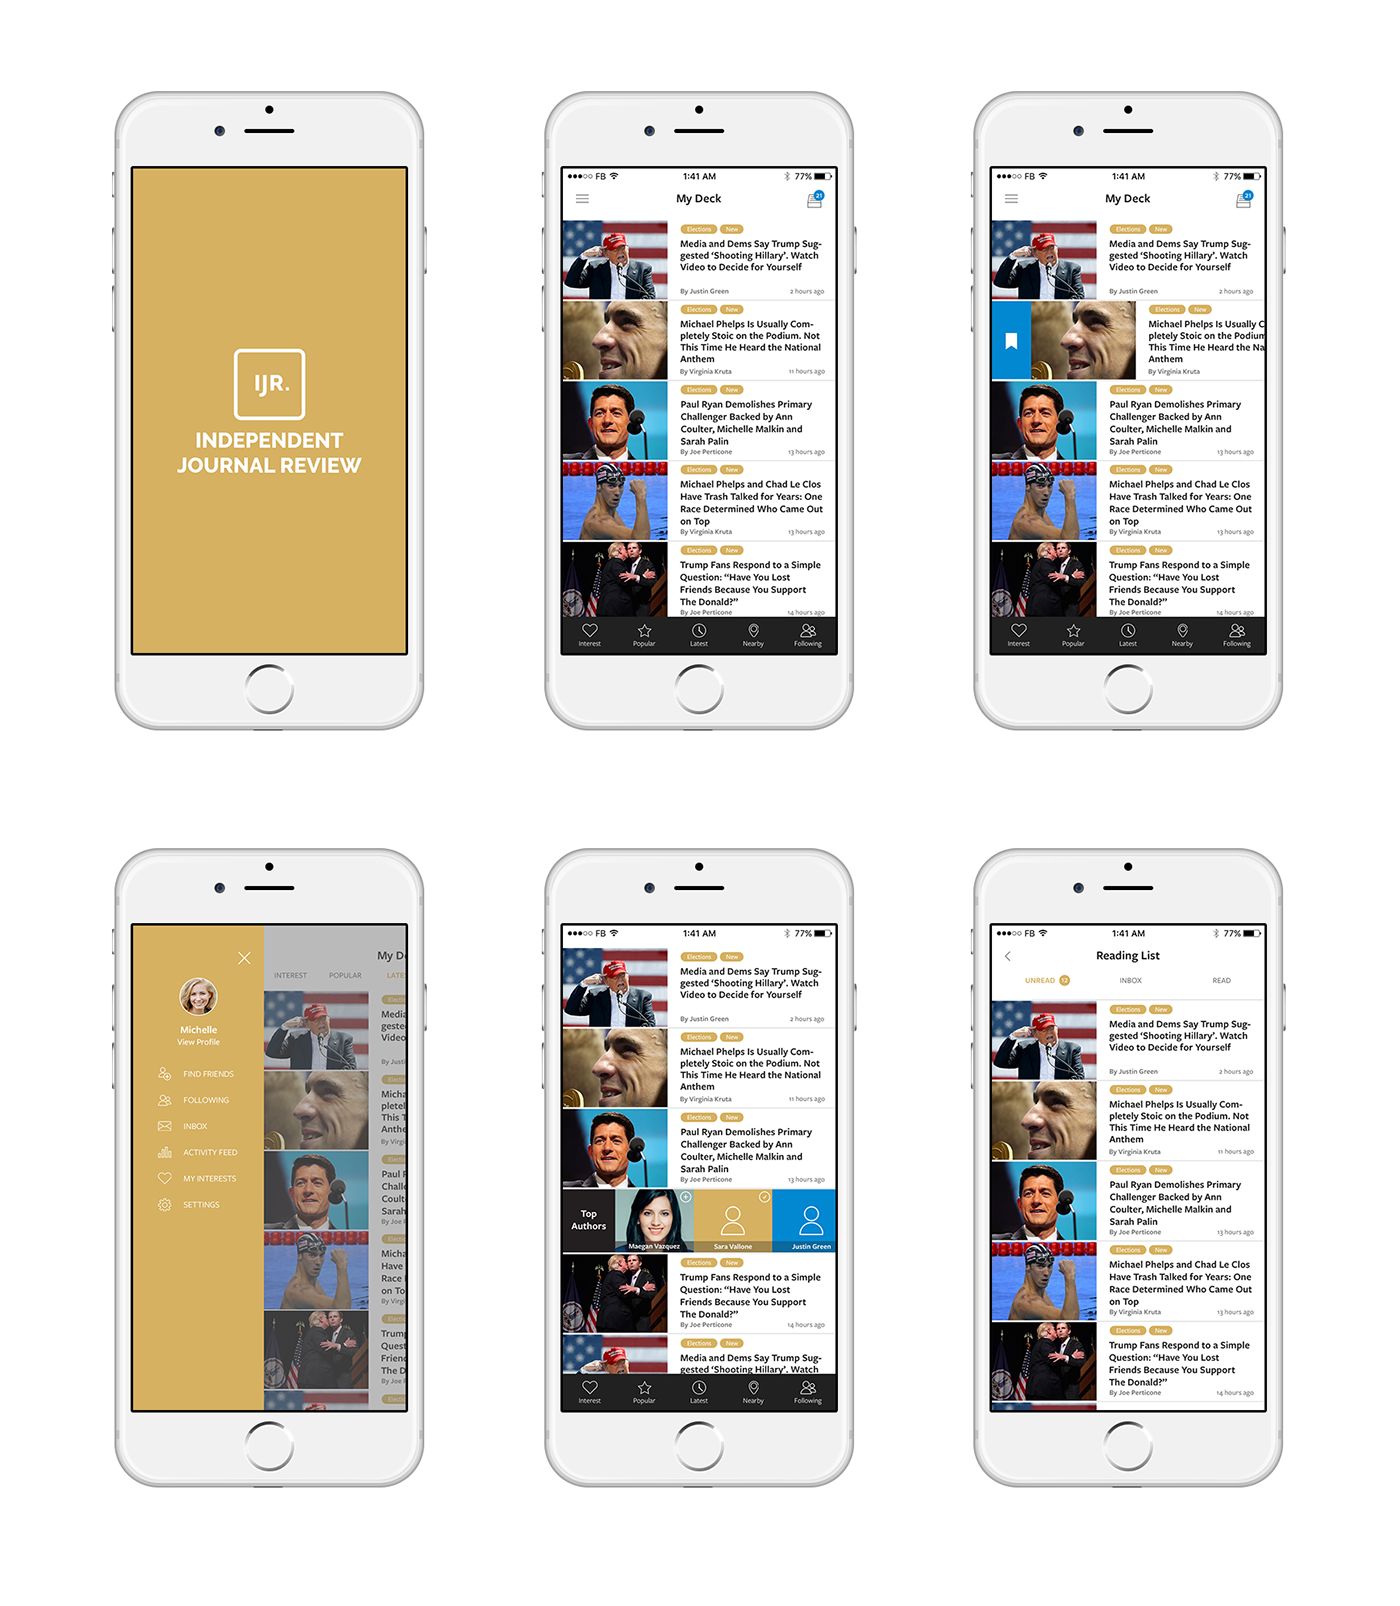 Mobile app ux/ui user interface app redesign IJR Independent Journal Review news